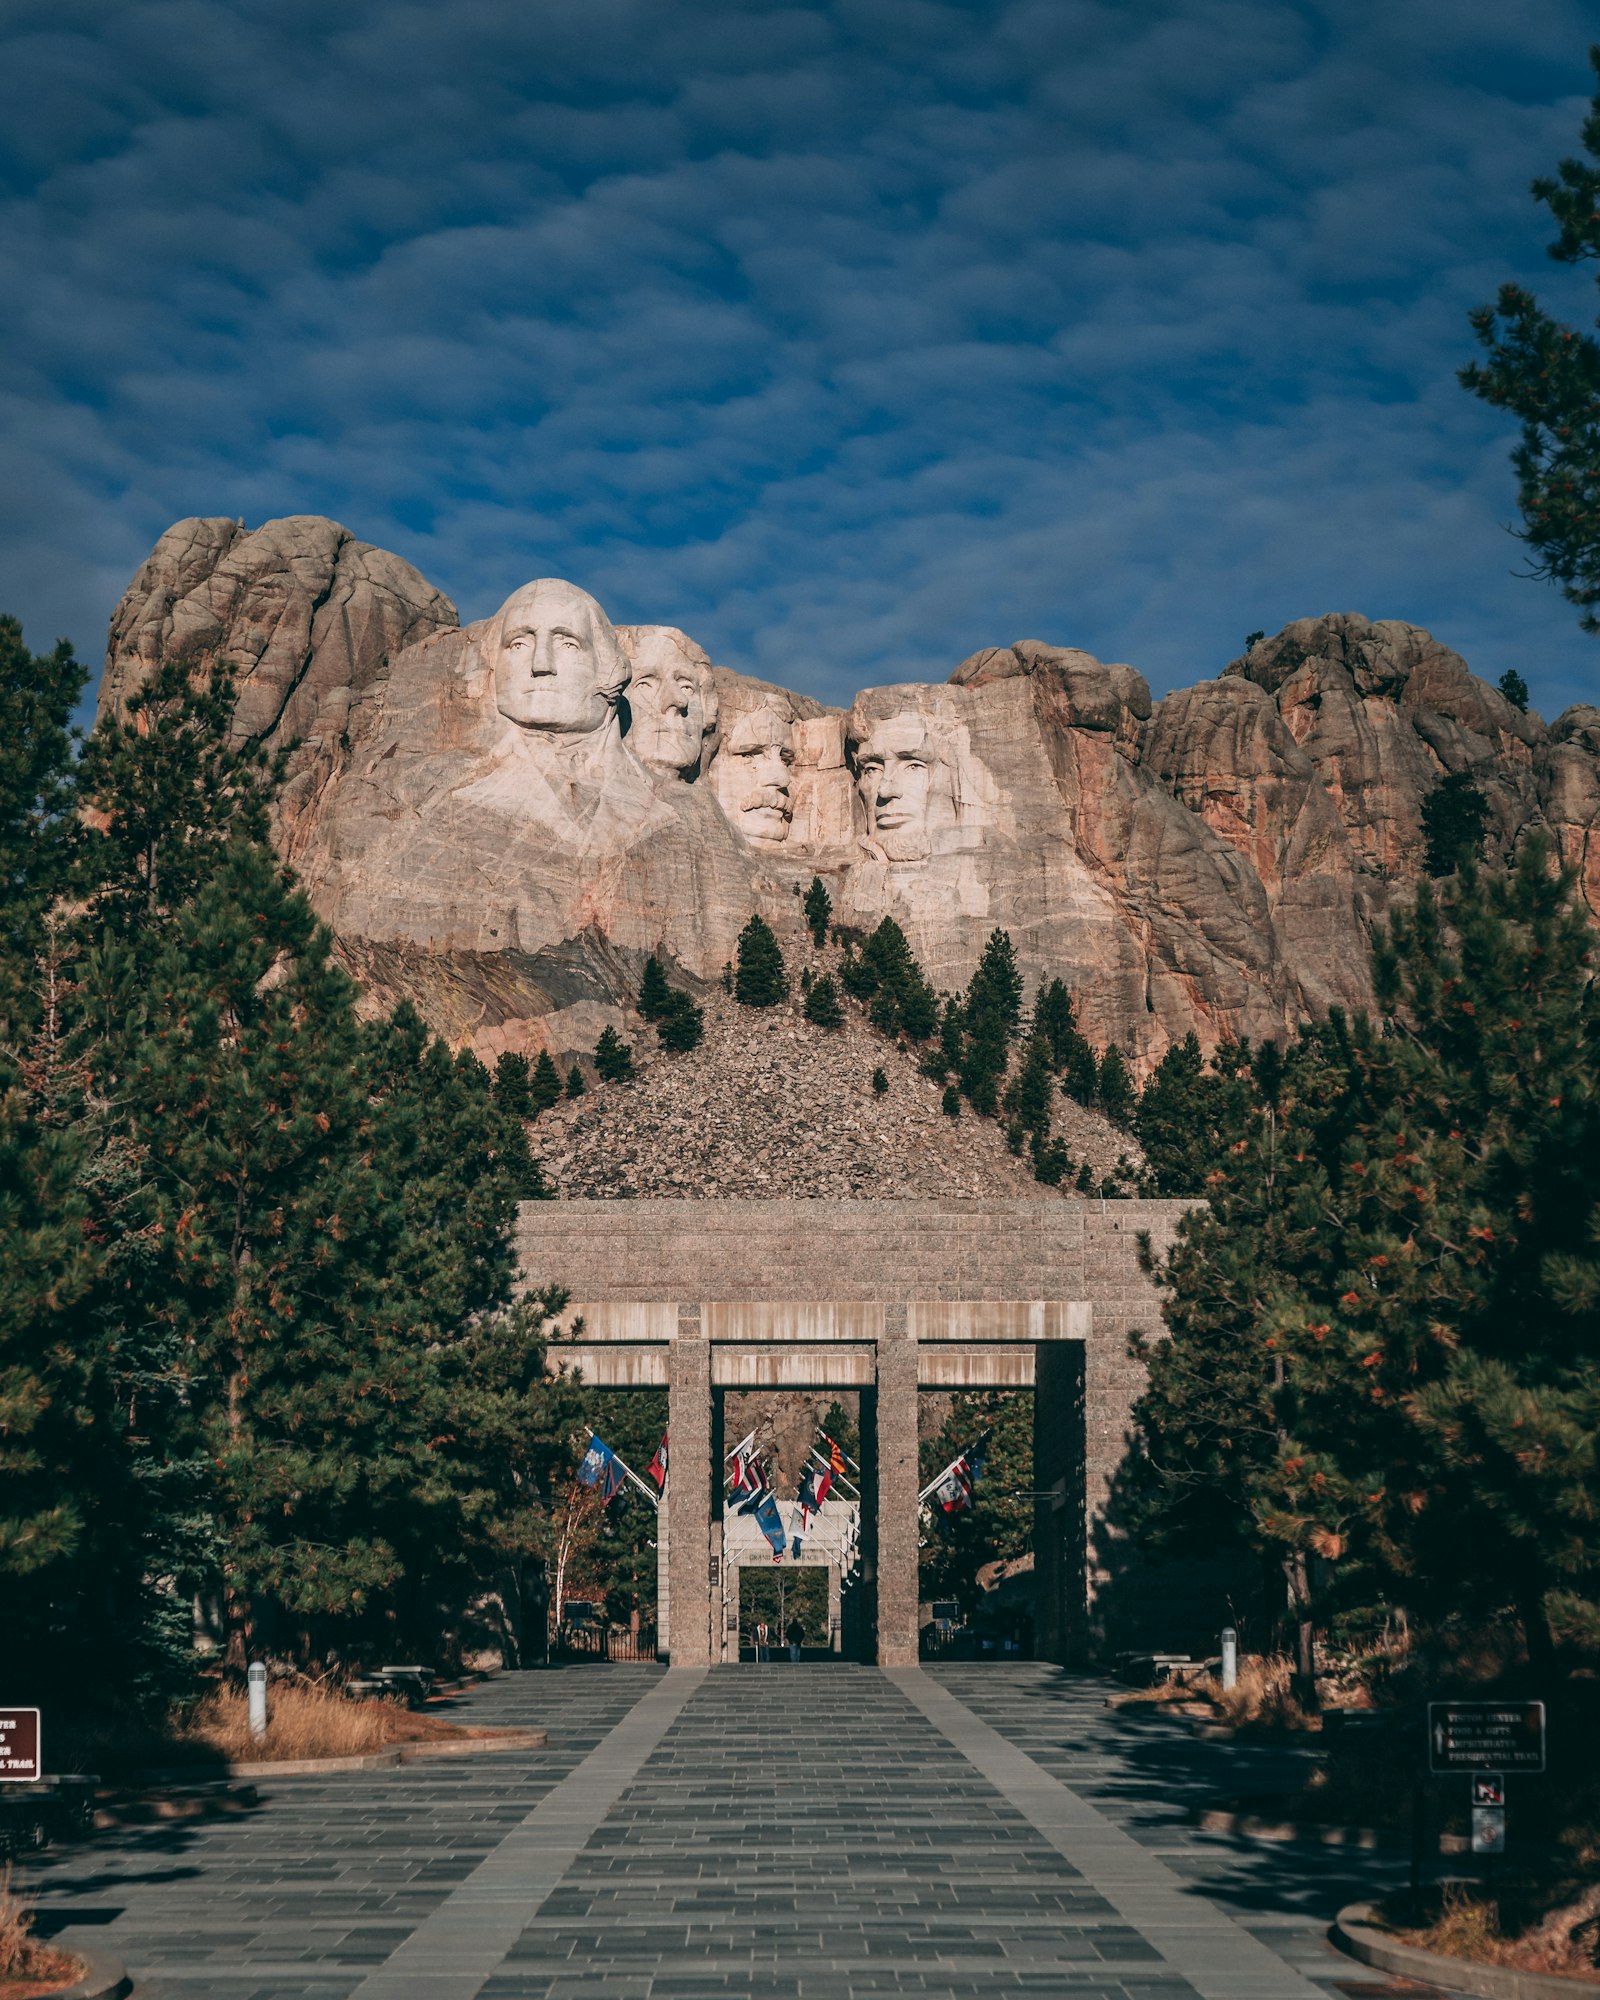 Sony a7 III sample photo. Mount rushmore during daytime photography